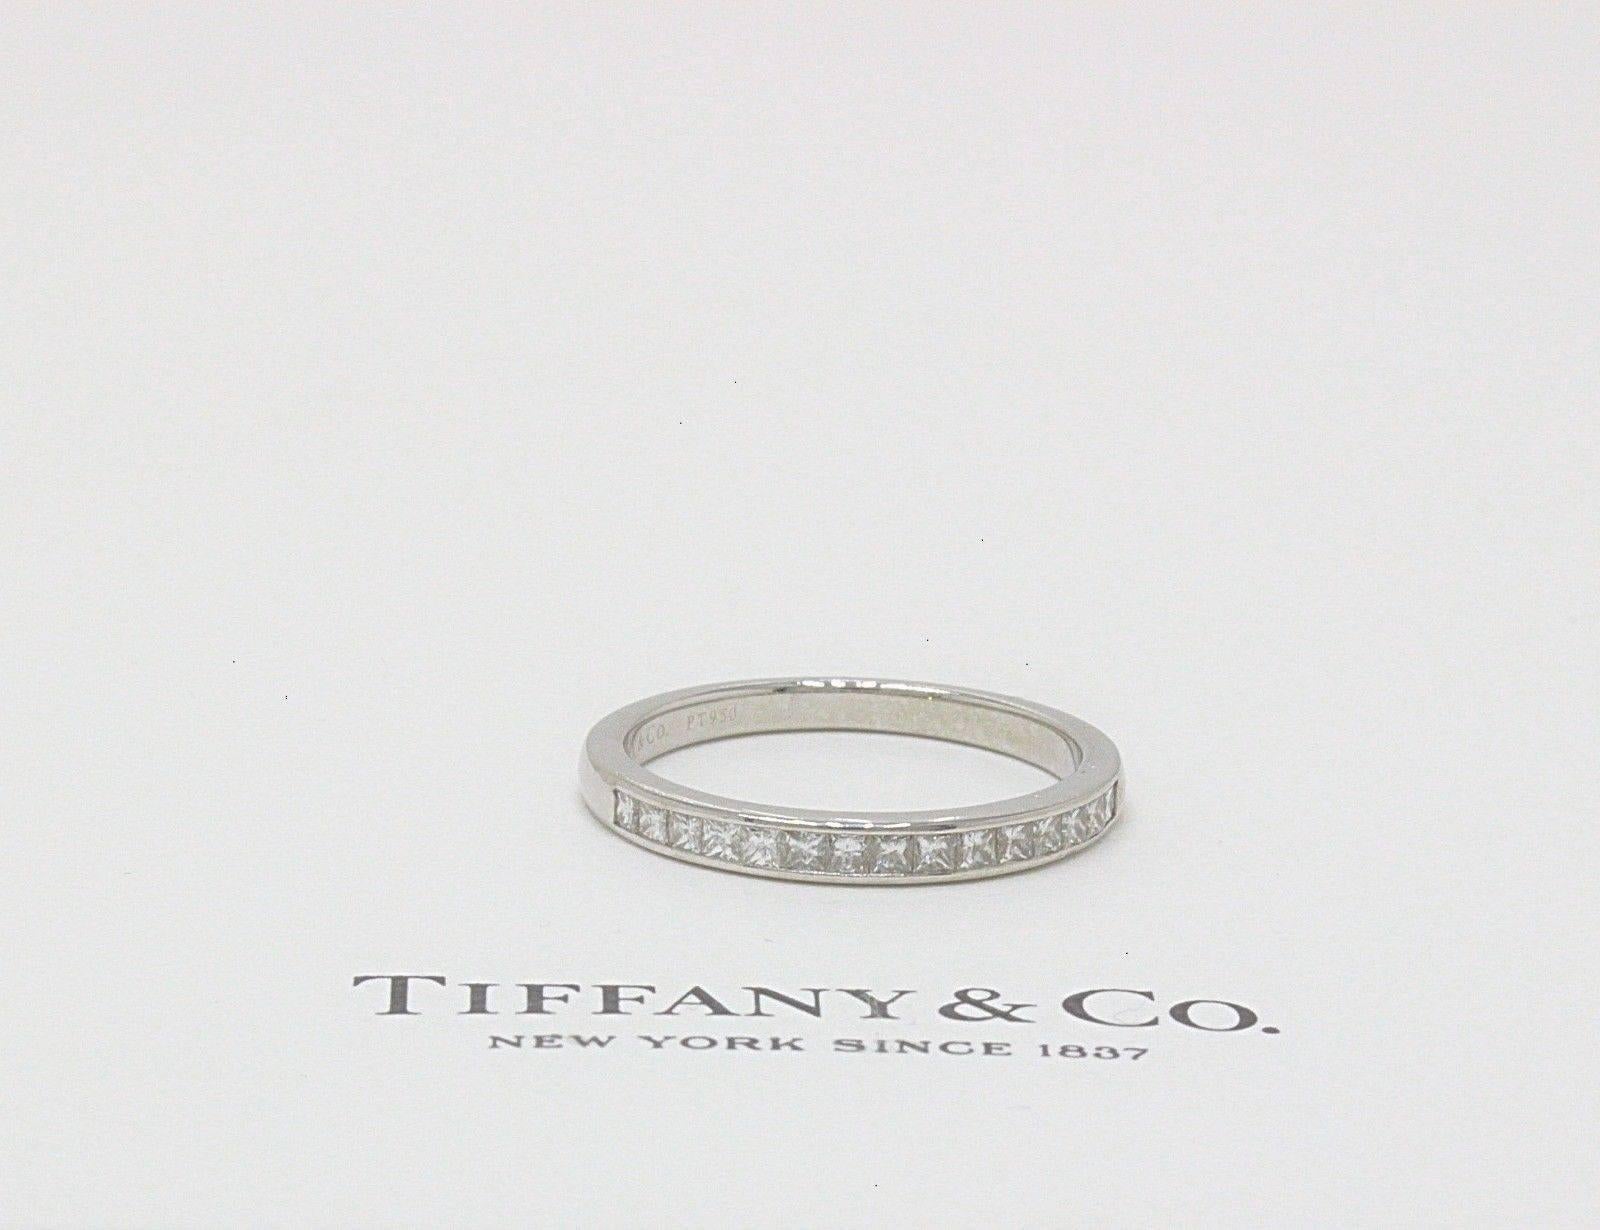 Tiffany & Co. Square Cut Diamond Wedding Band Ring in Platinum 0.39 tcw 2.6 MM For Sale 6